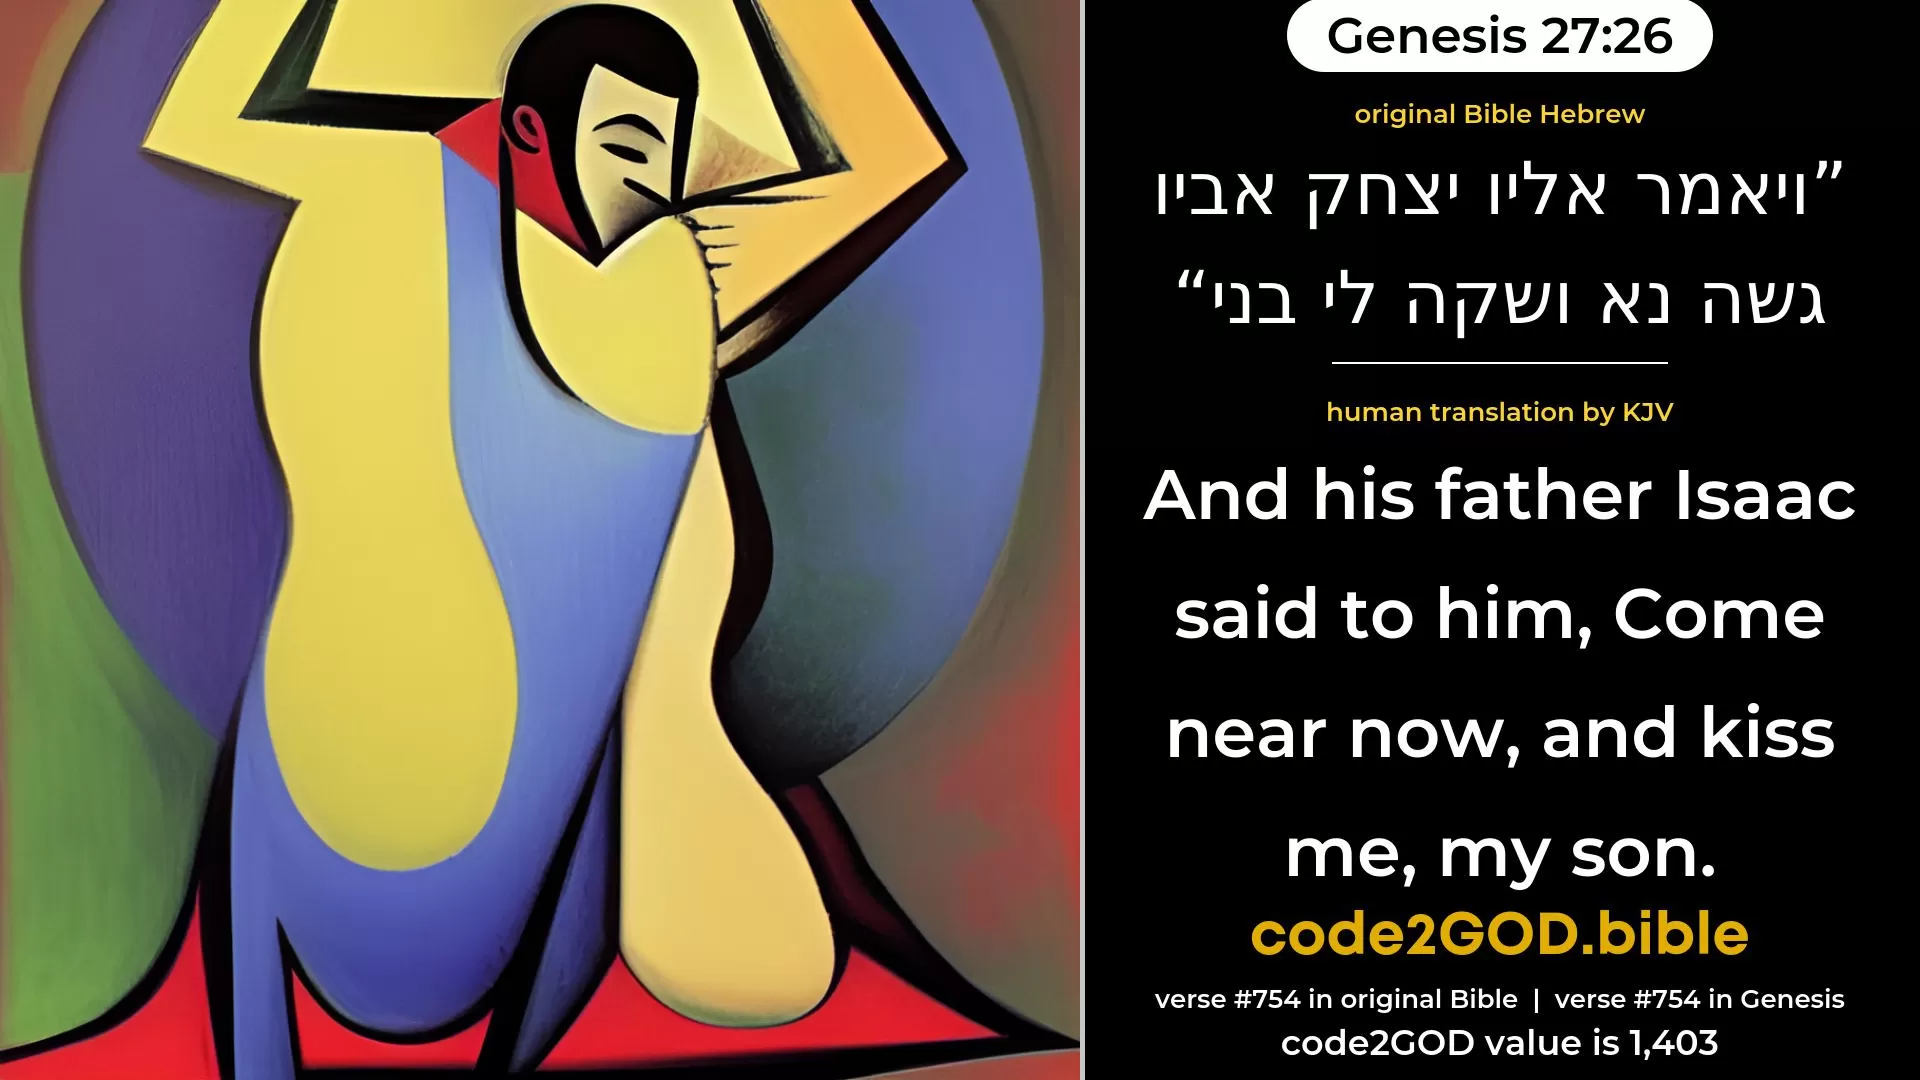 Genesis 27-26≈And his father Isaac said unto him: ‘Come near now, and kiss me, my son.’ original Bible ויאמר אליו יצחק אביו גשה נא ושקה לי בני code2GOD